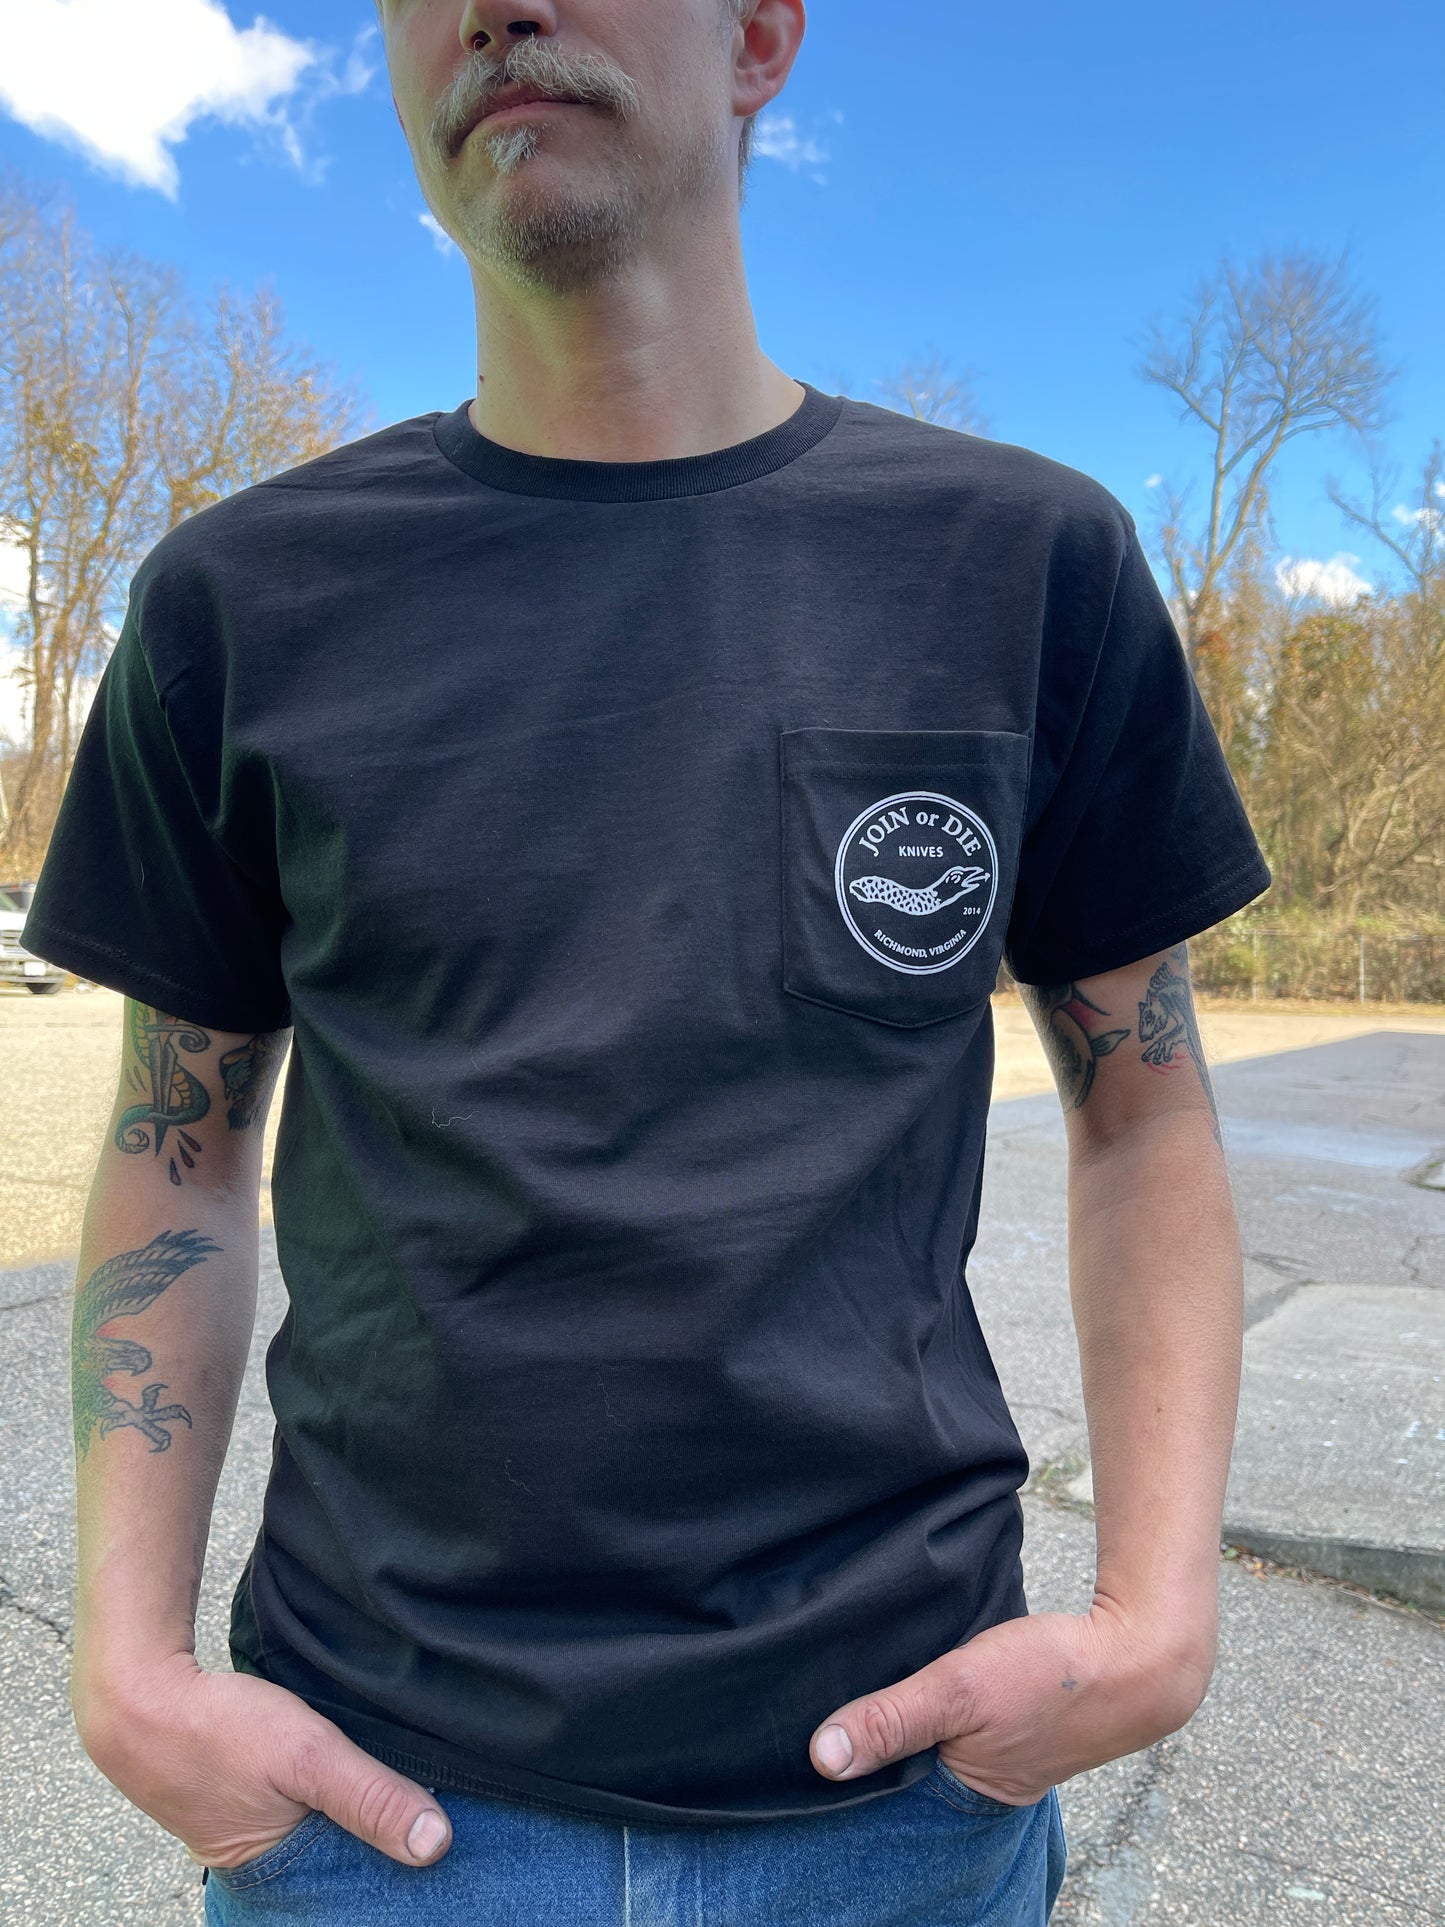 Join or Die Challenge Coin Tee